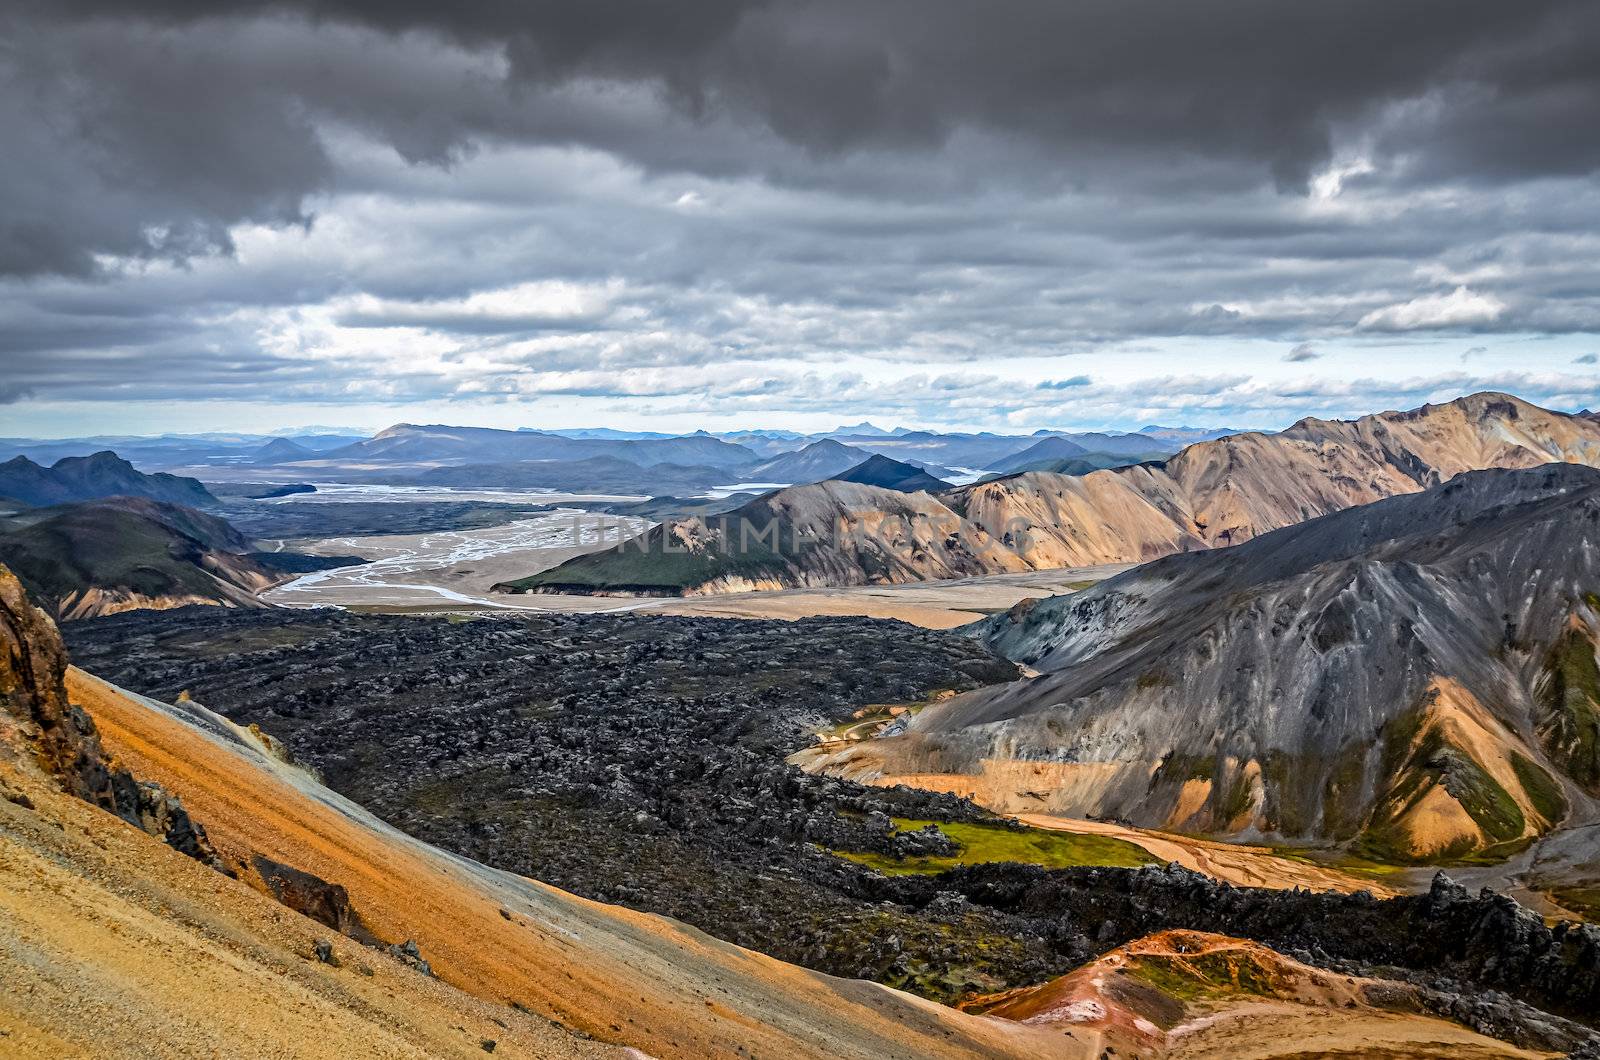 Colorful volcanic landscape in Landmannalaugar, Iceland by martinm303